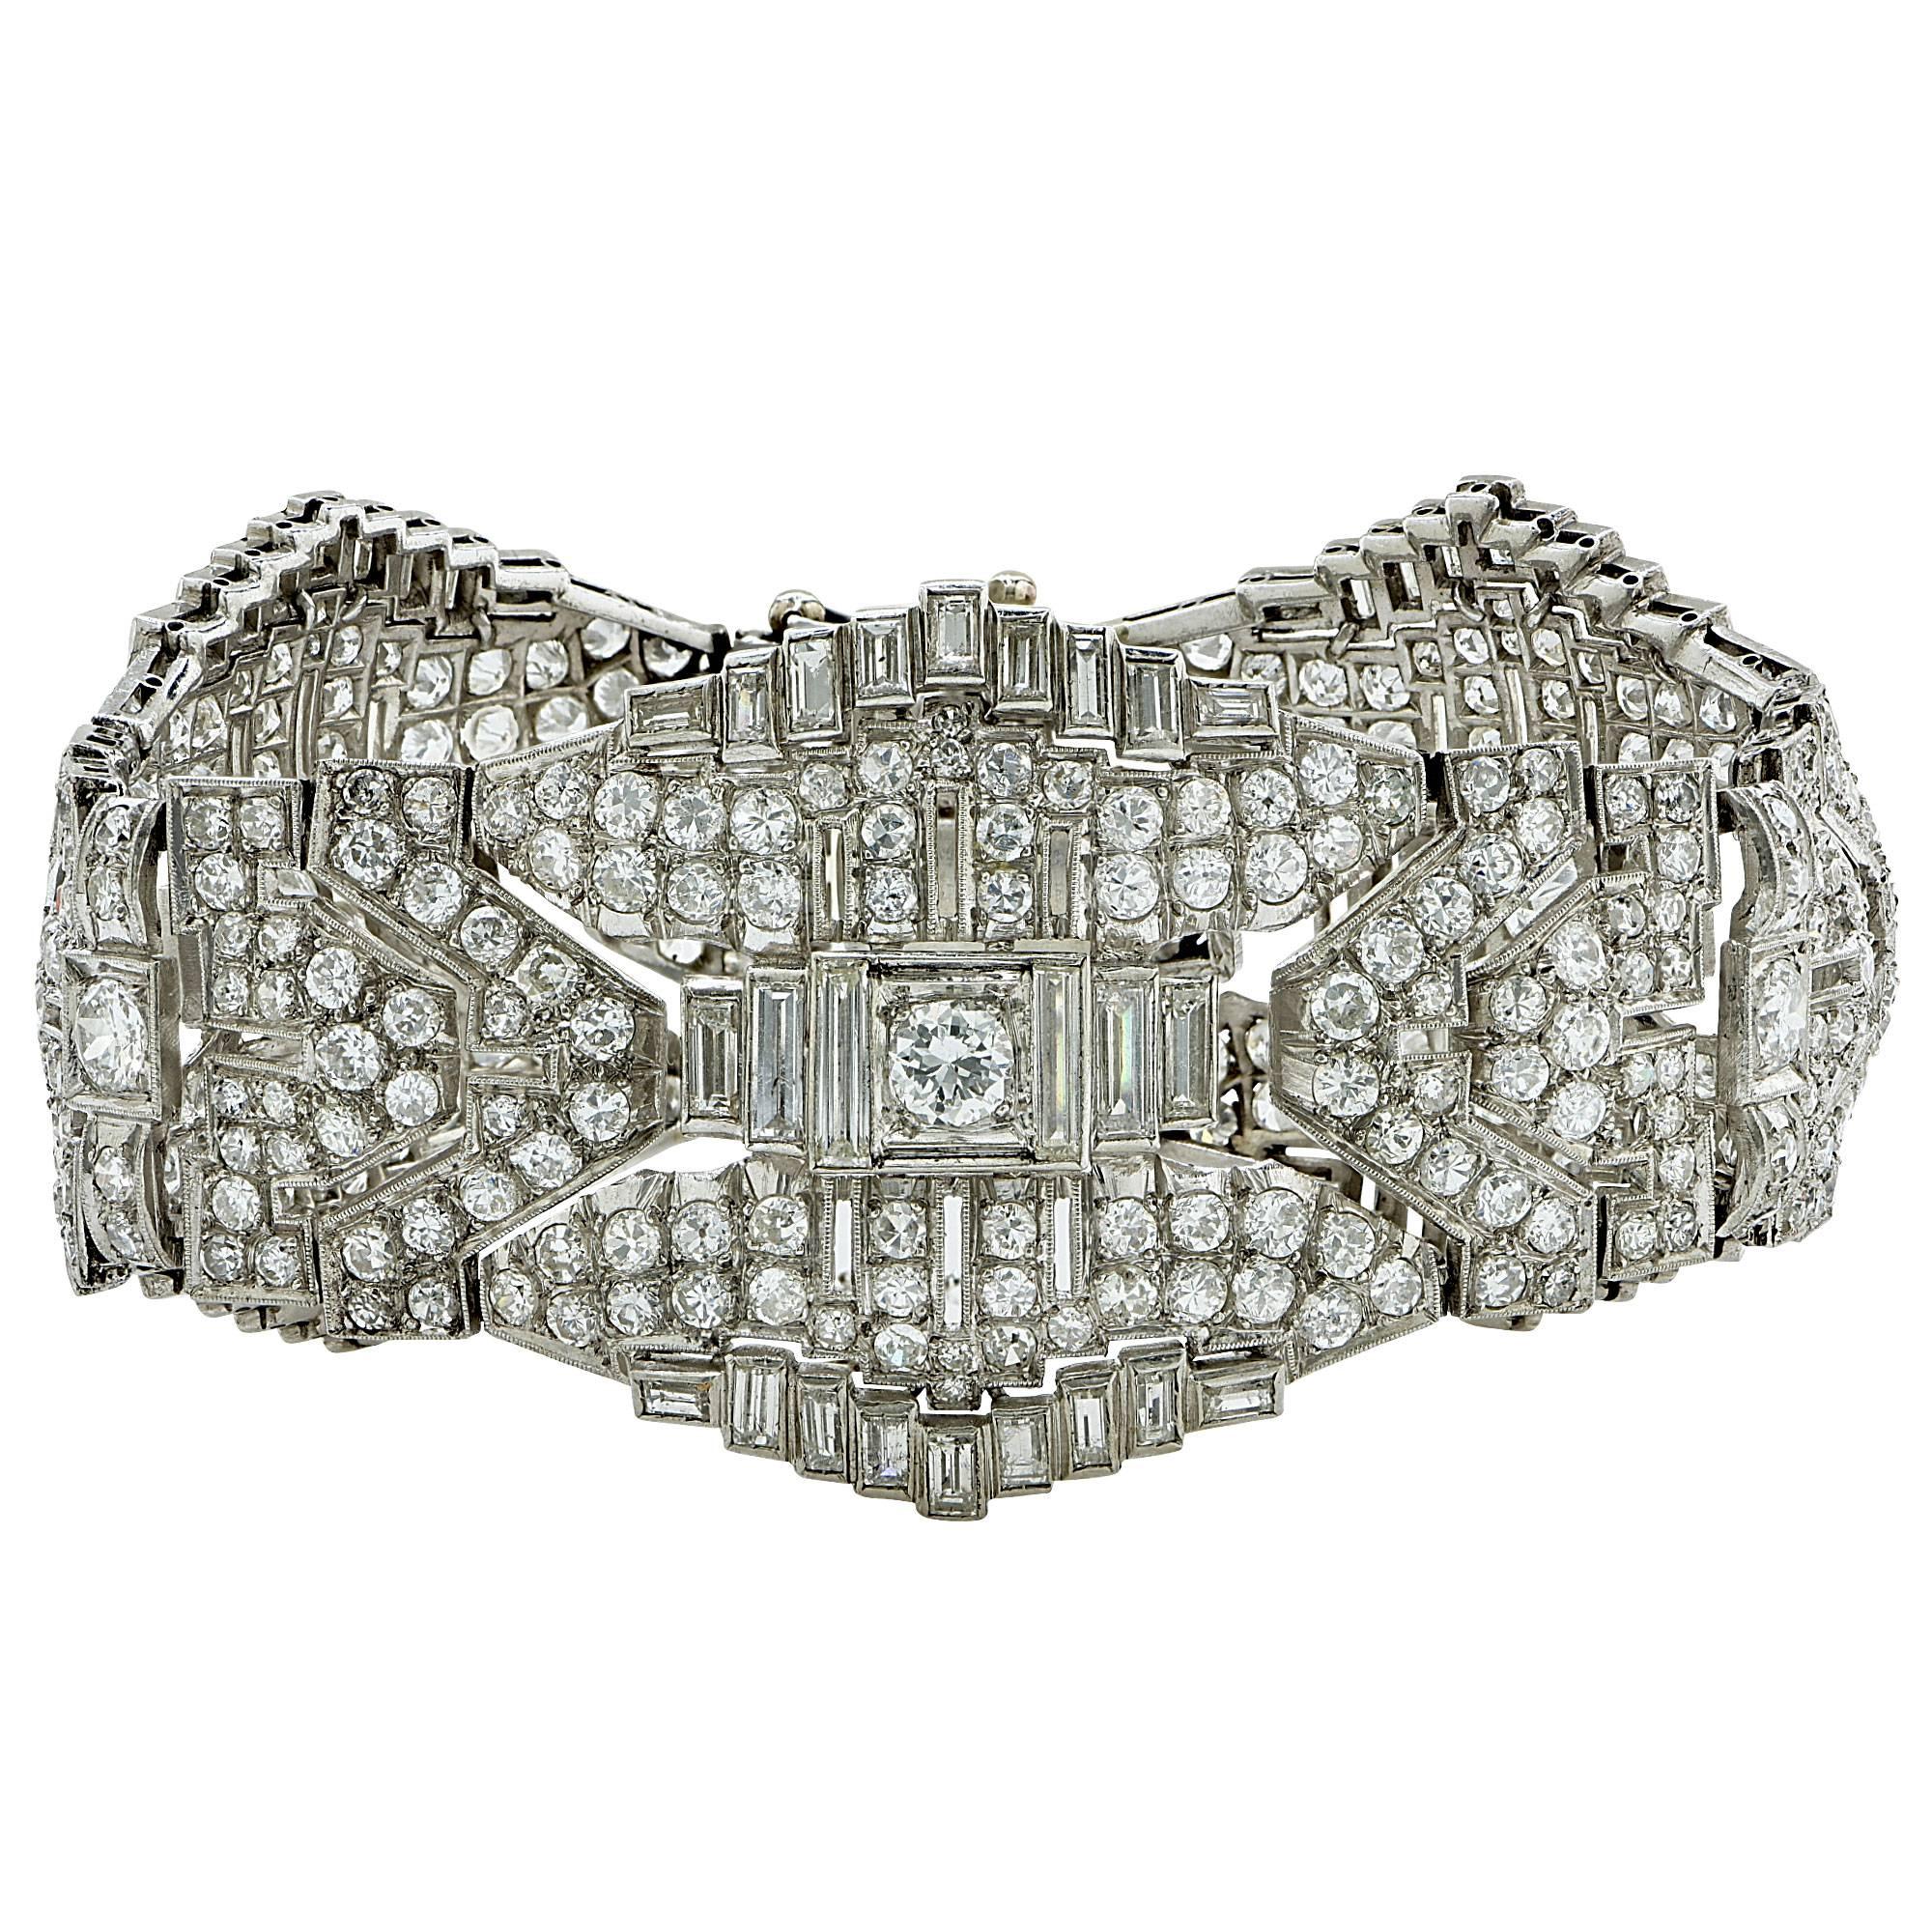 Platinum Art Deco bracelet featuring 355 European and baguette cut diamonds weighing approximately 23cts total, G-H color VS-SI clarity.

The bracelet measures 7 inches in length and 1.37 inches in width at the widest part.
It is stamped and